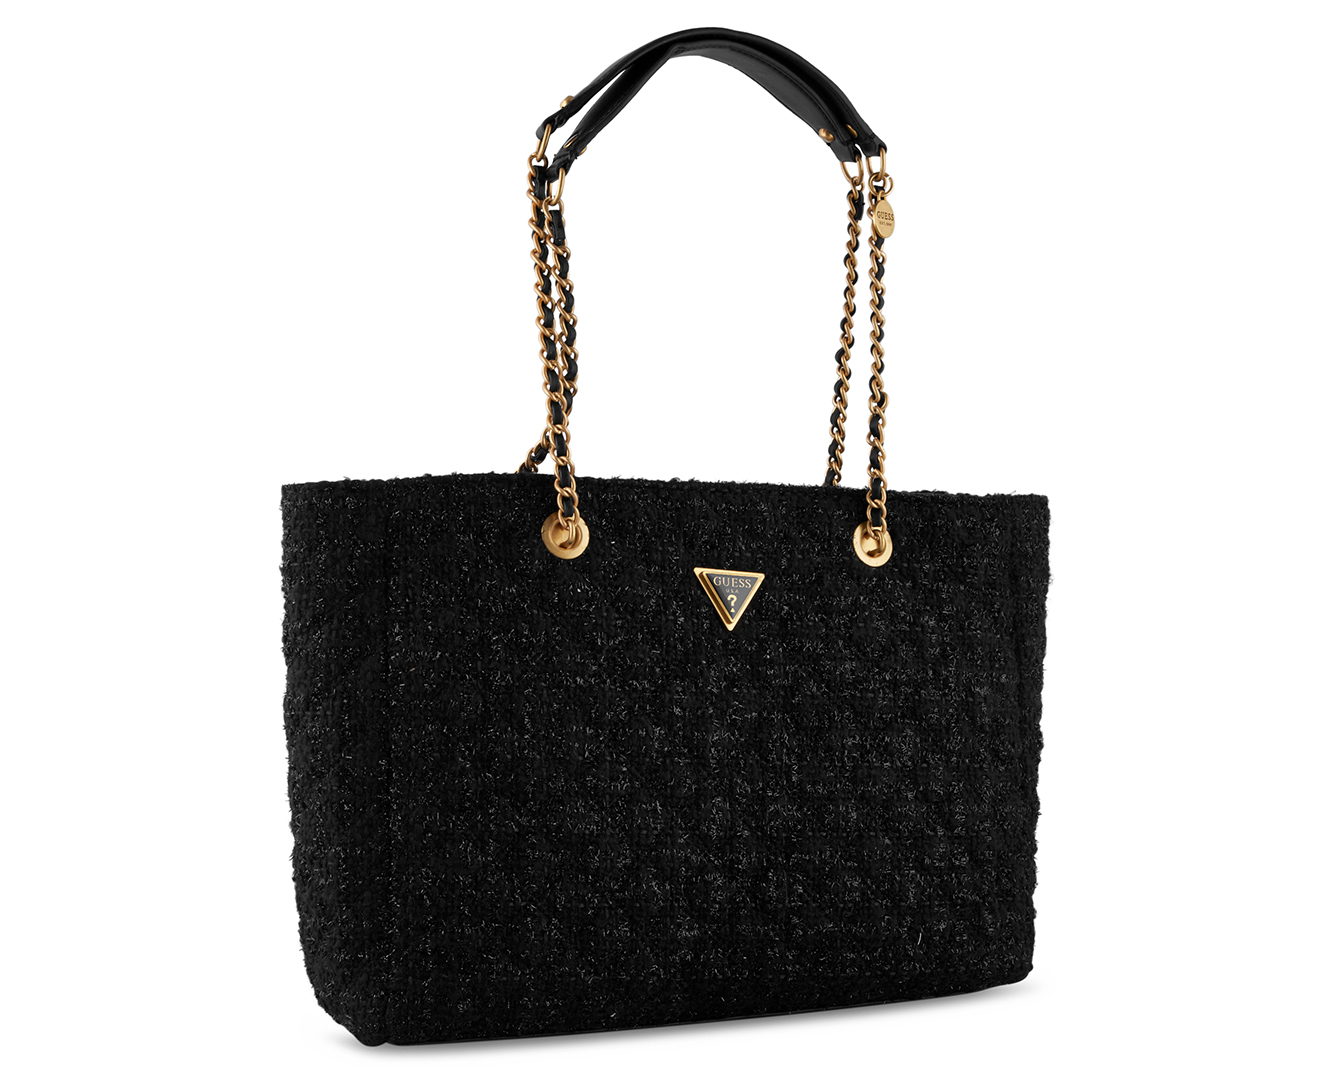 Guess Handbags Alby Toggle Tote Coal/Black | The Little Green Bag